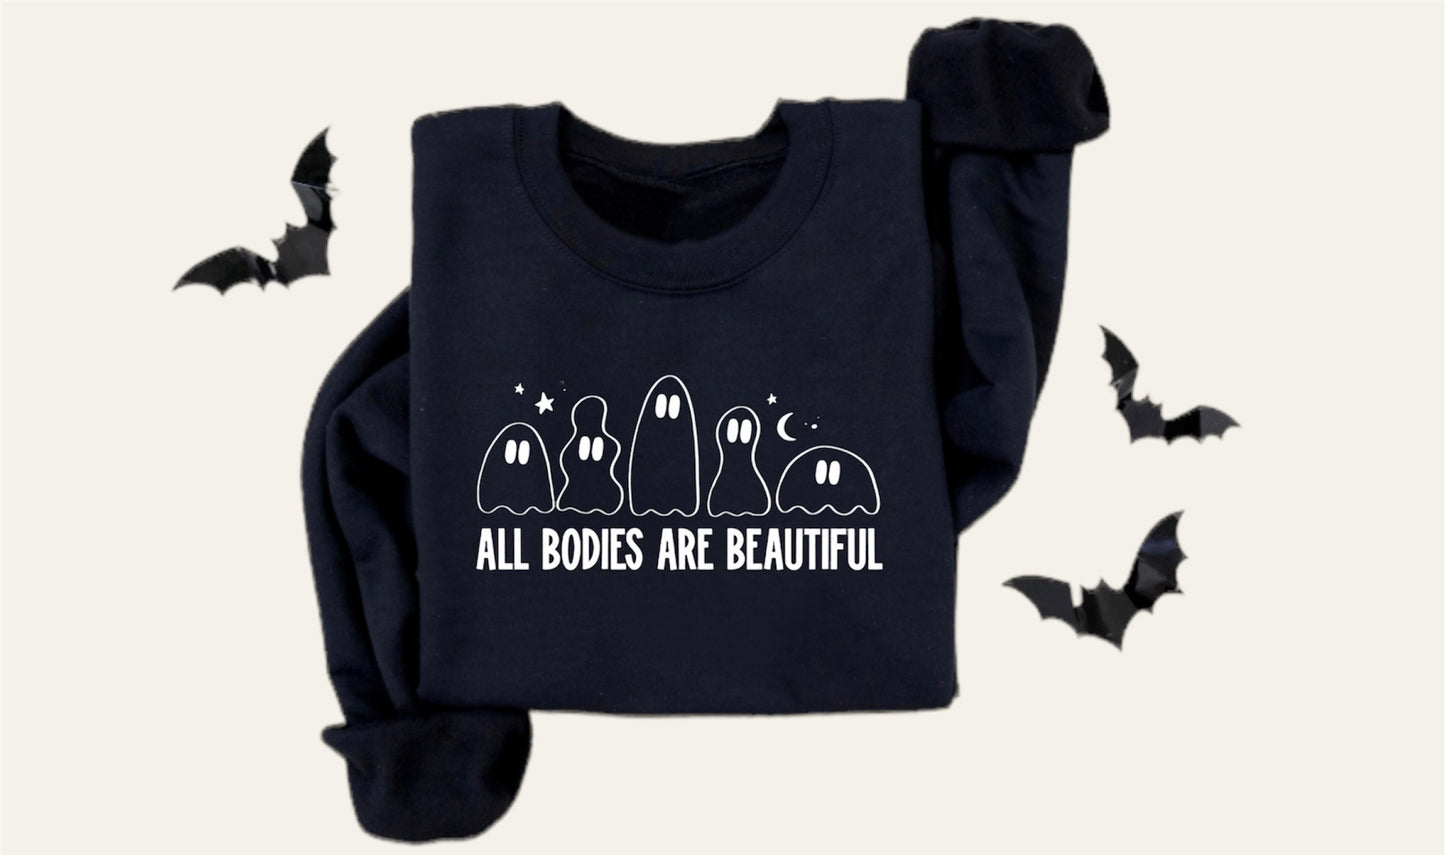 🎃All bodies are beautiful